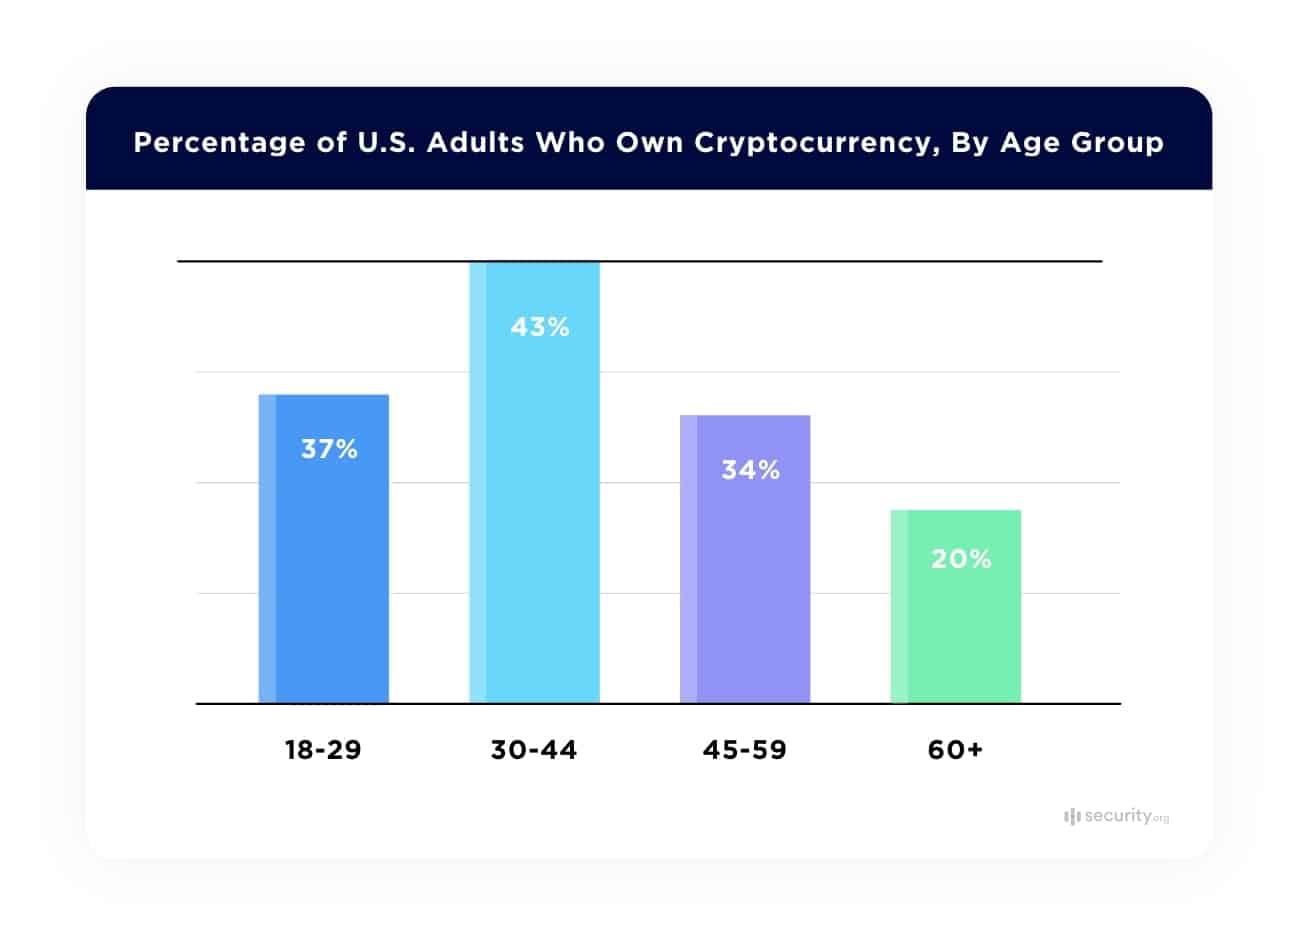 Percentage of U.S. Adults Who Own Cryptocurrency, by Age Group